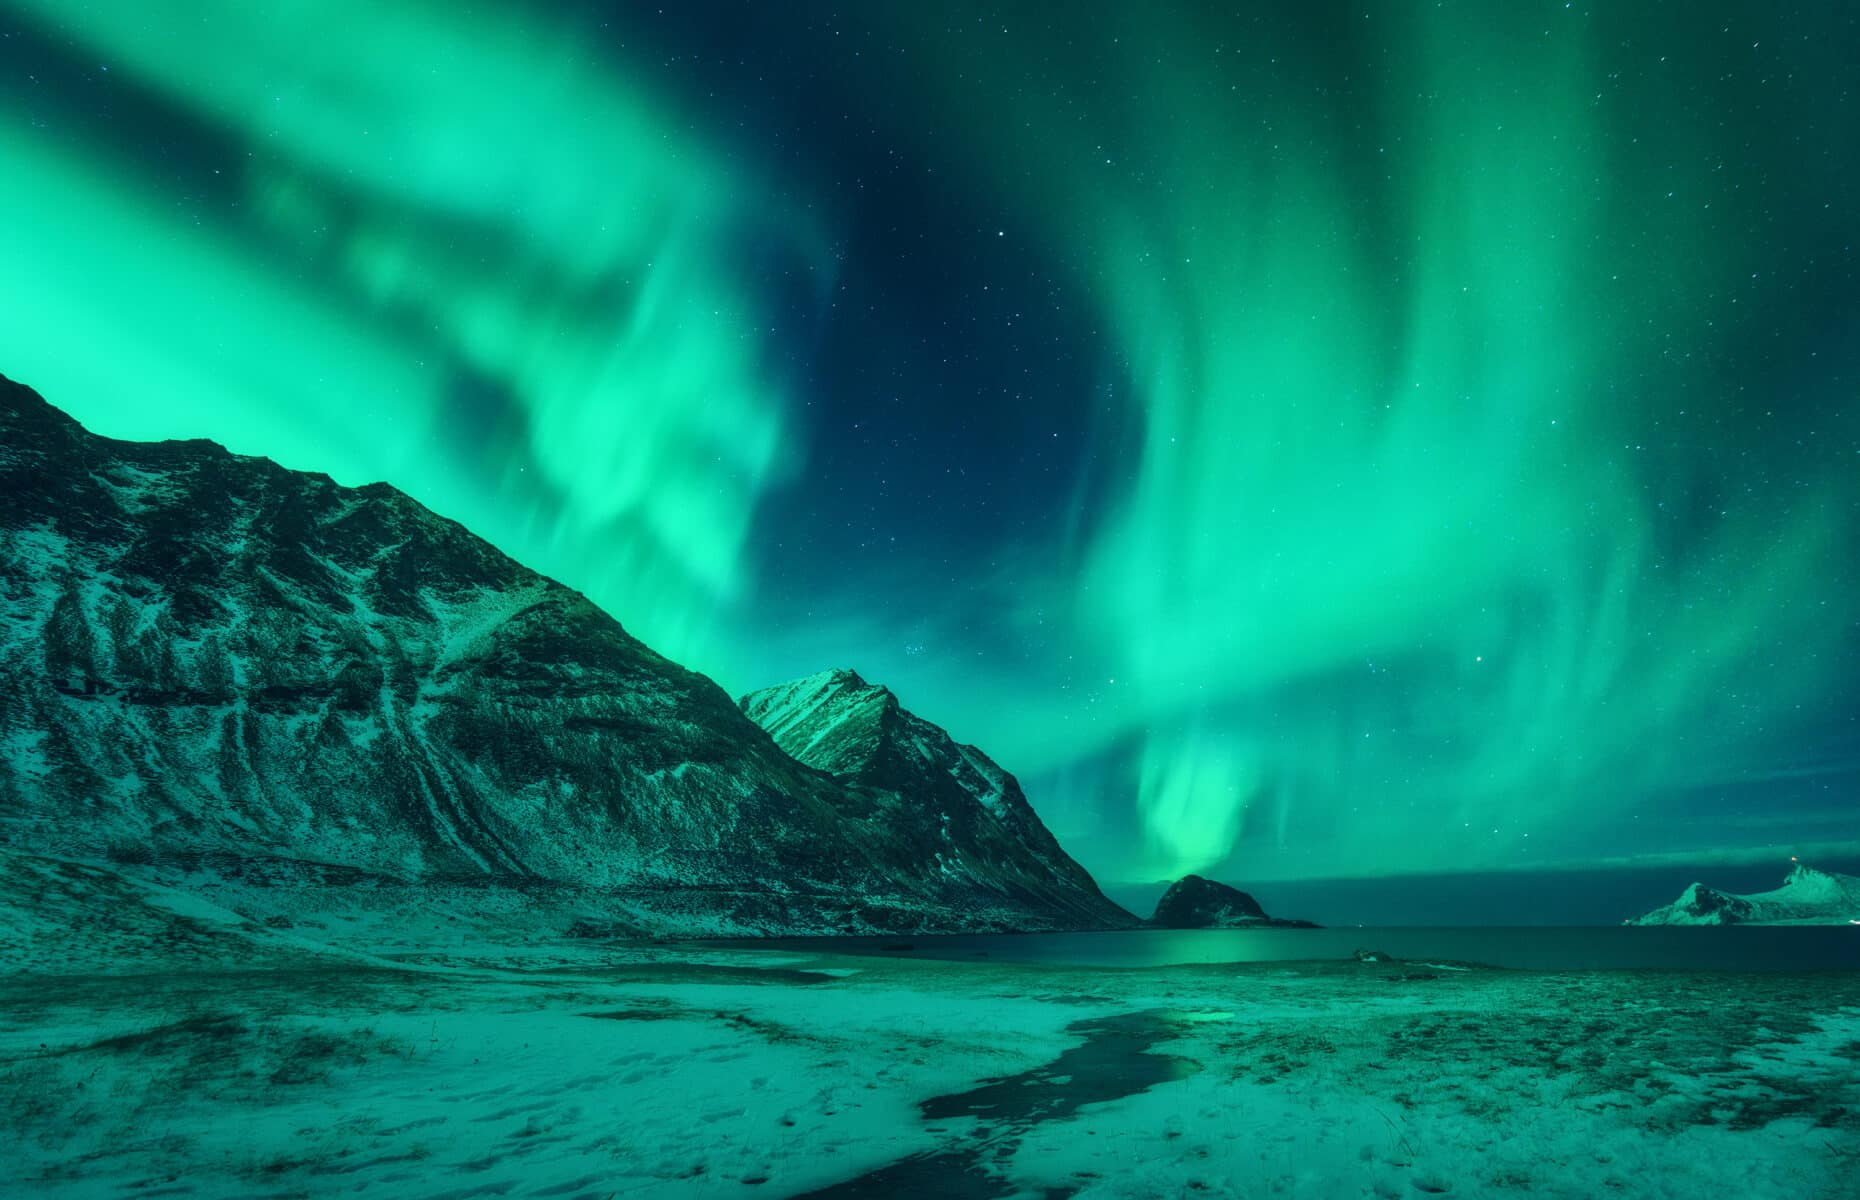 Northern lights in Lofoten islands, Norway. Green aurora borealis. Starry sky with polar lights. Night winter landscape with aurora, sea, high rocks, stream, nordic beach and snowy mountains. Travel